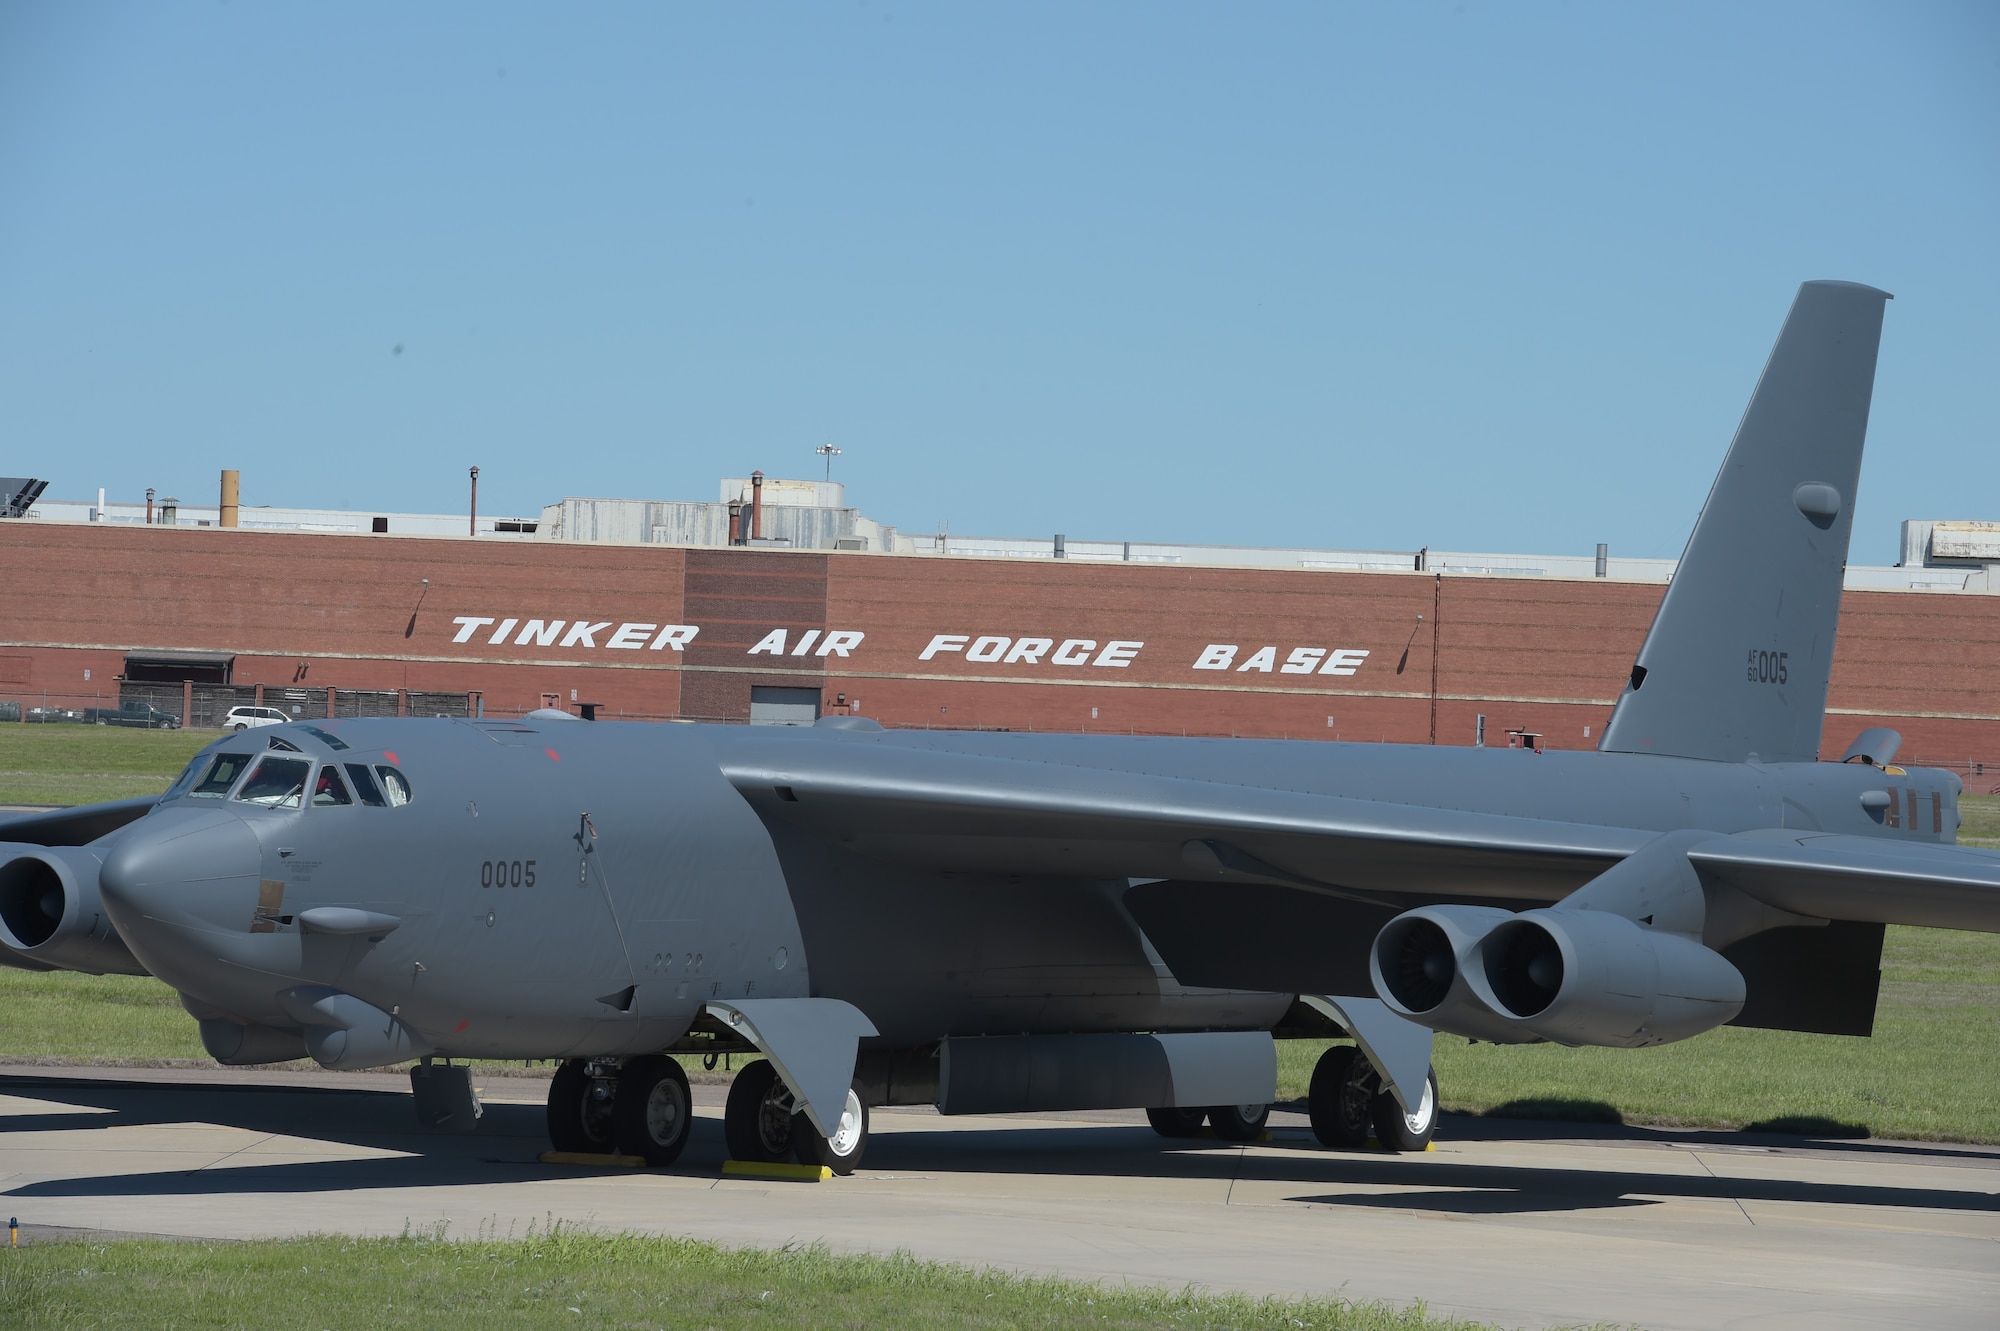 Boeing B-52H, 60-0005, parked in front of Oklahoma City Air Logistics Complex Bldg. 3001 following major overhaul on May 1, 2017, Tinker Air Force Base, Oklahoma. OC-ALC is responsible for depot level maintenance of the B-52 fleet with a large portion of the work taking place in the building shown behind. (U.S. Air Force photo/Greg L. Davis)